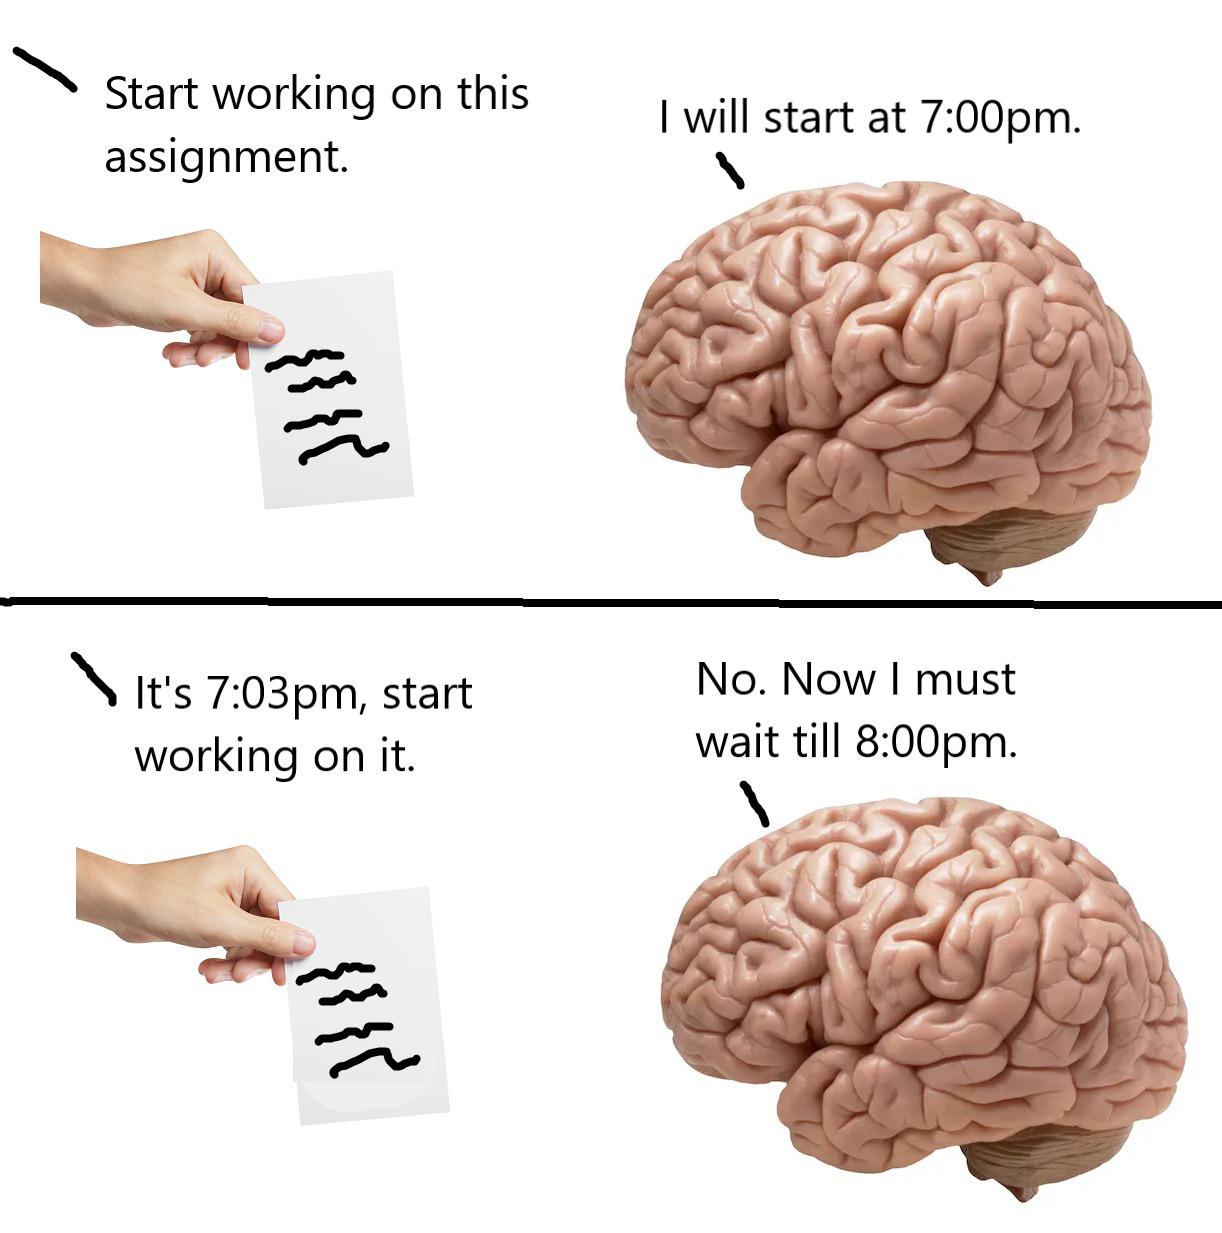 dank memes - neurologist - Start working on this assignment. It's pm, start working on it. I will start at pm. No. Now I must wait till pm.